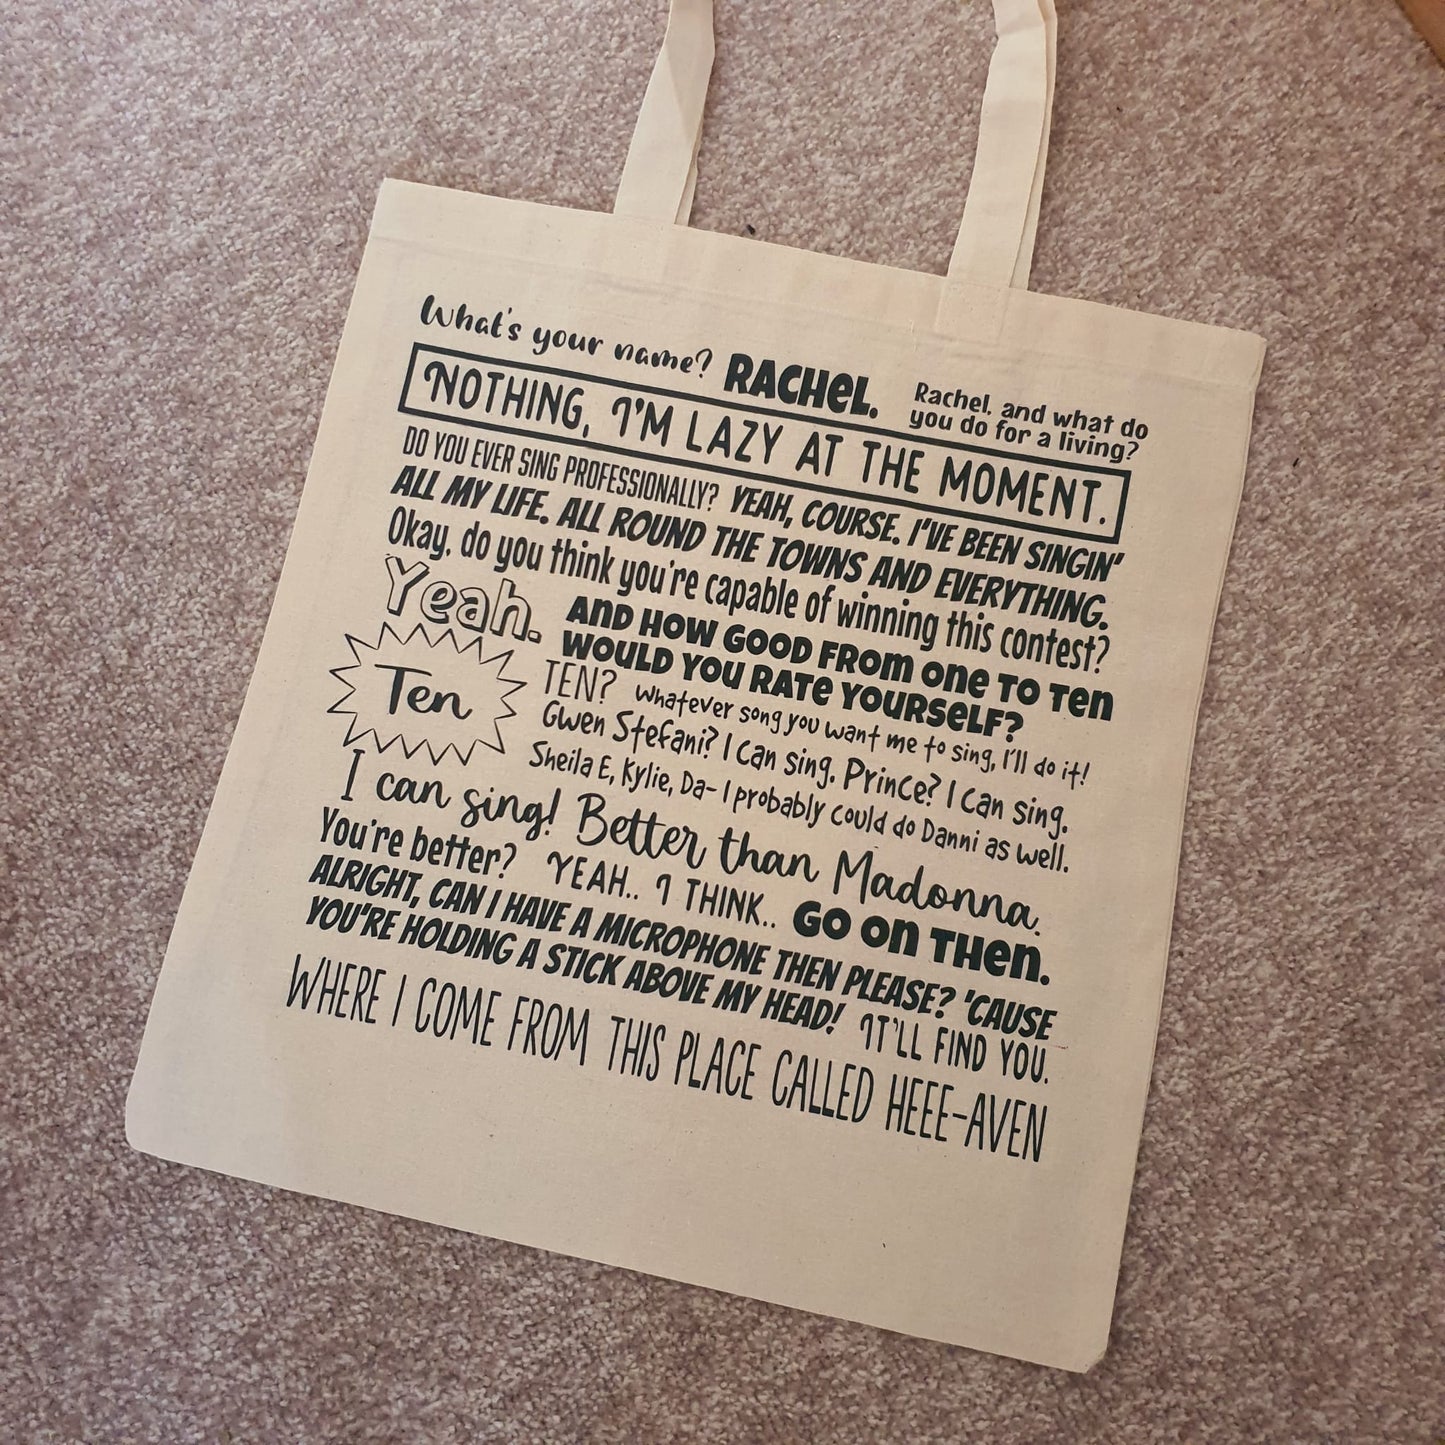 Rachel Nothing I'm Lazy at the Moment Tote Bag